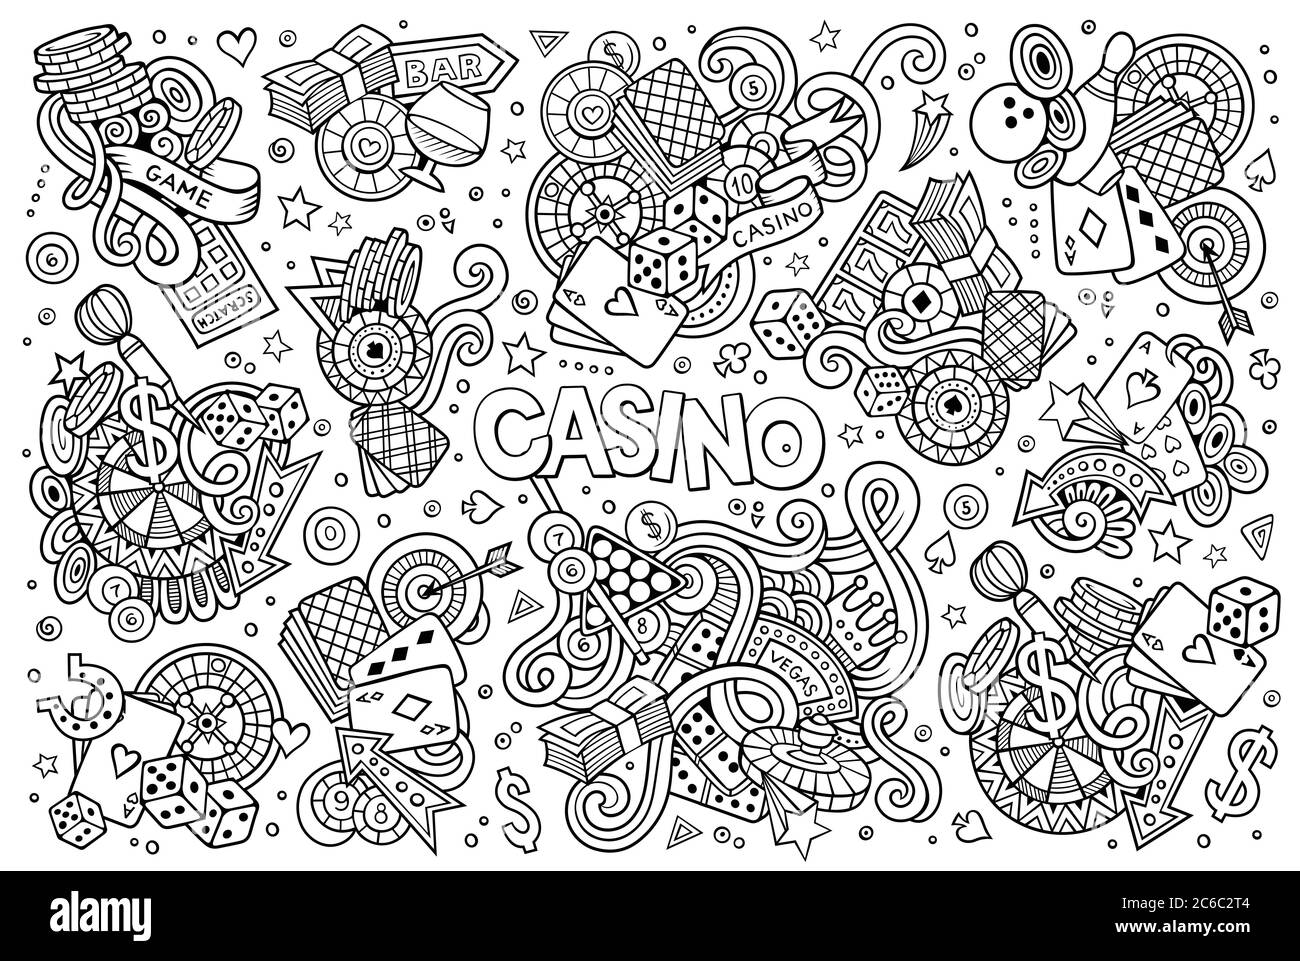 Sketchy vector hand drawn doodles cartoon set of Casino objects Stock Vector